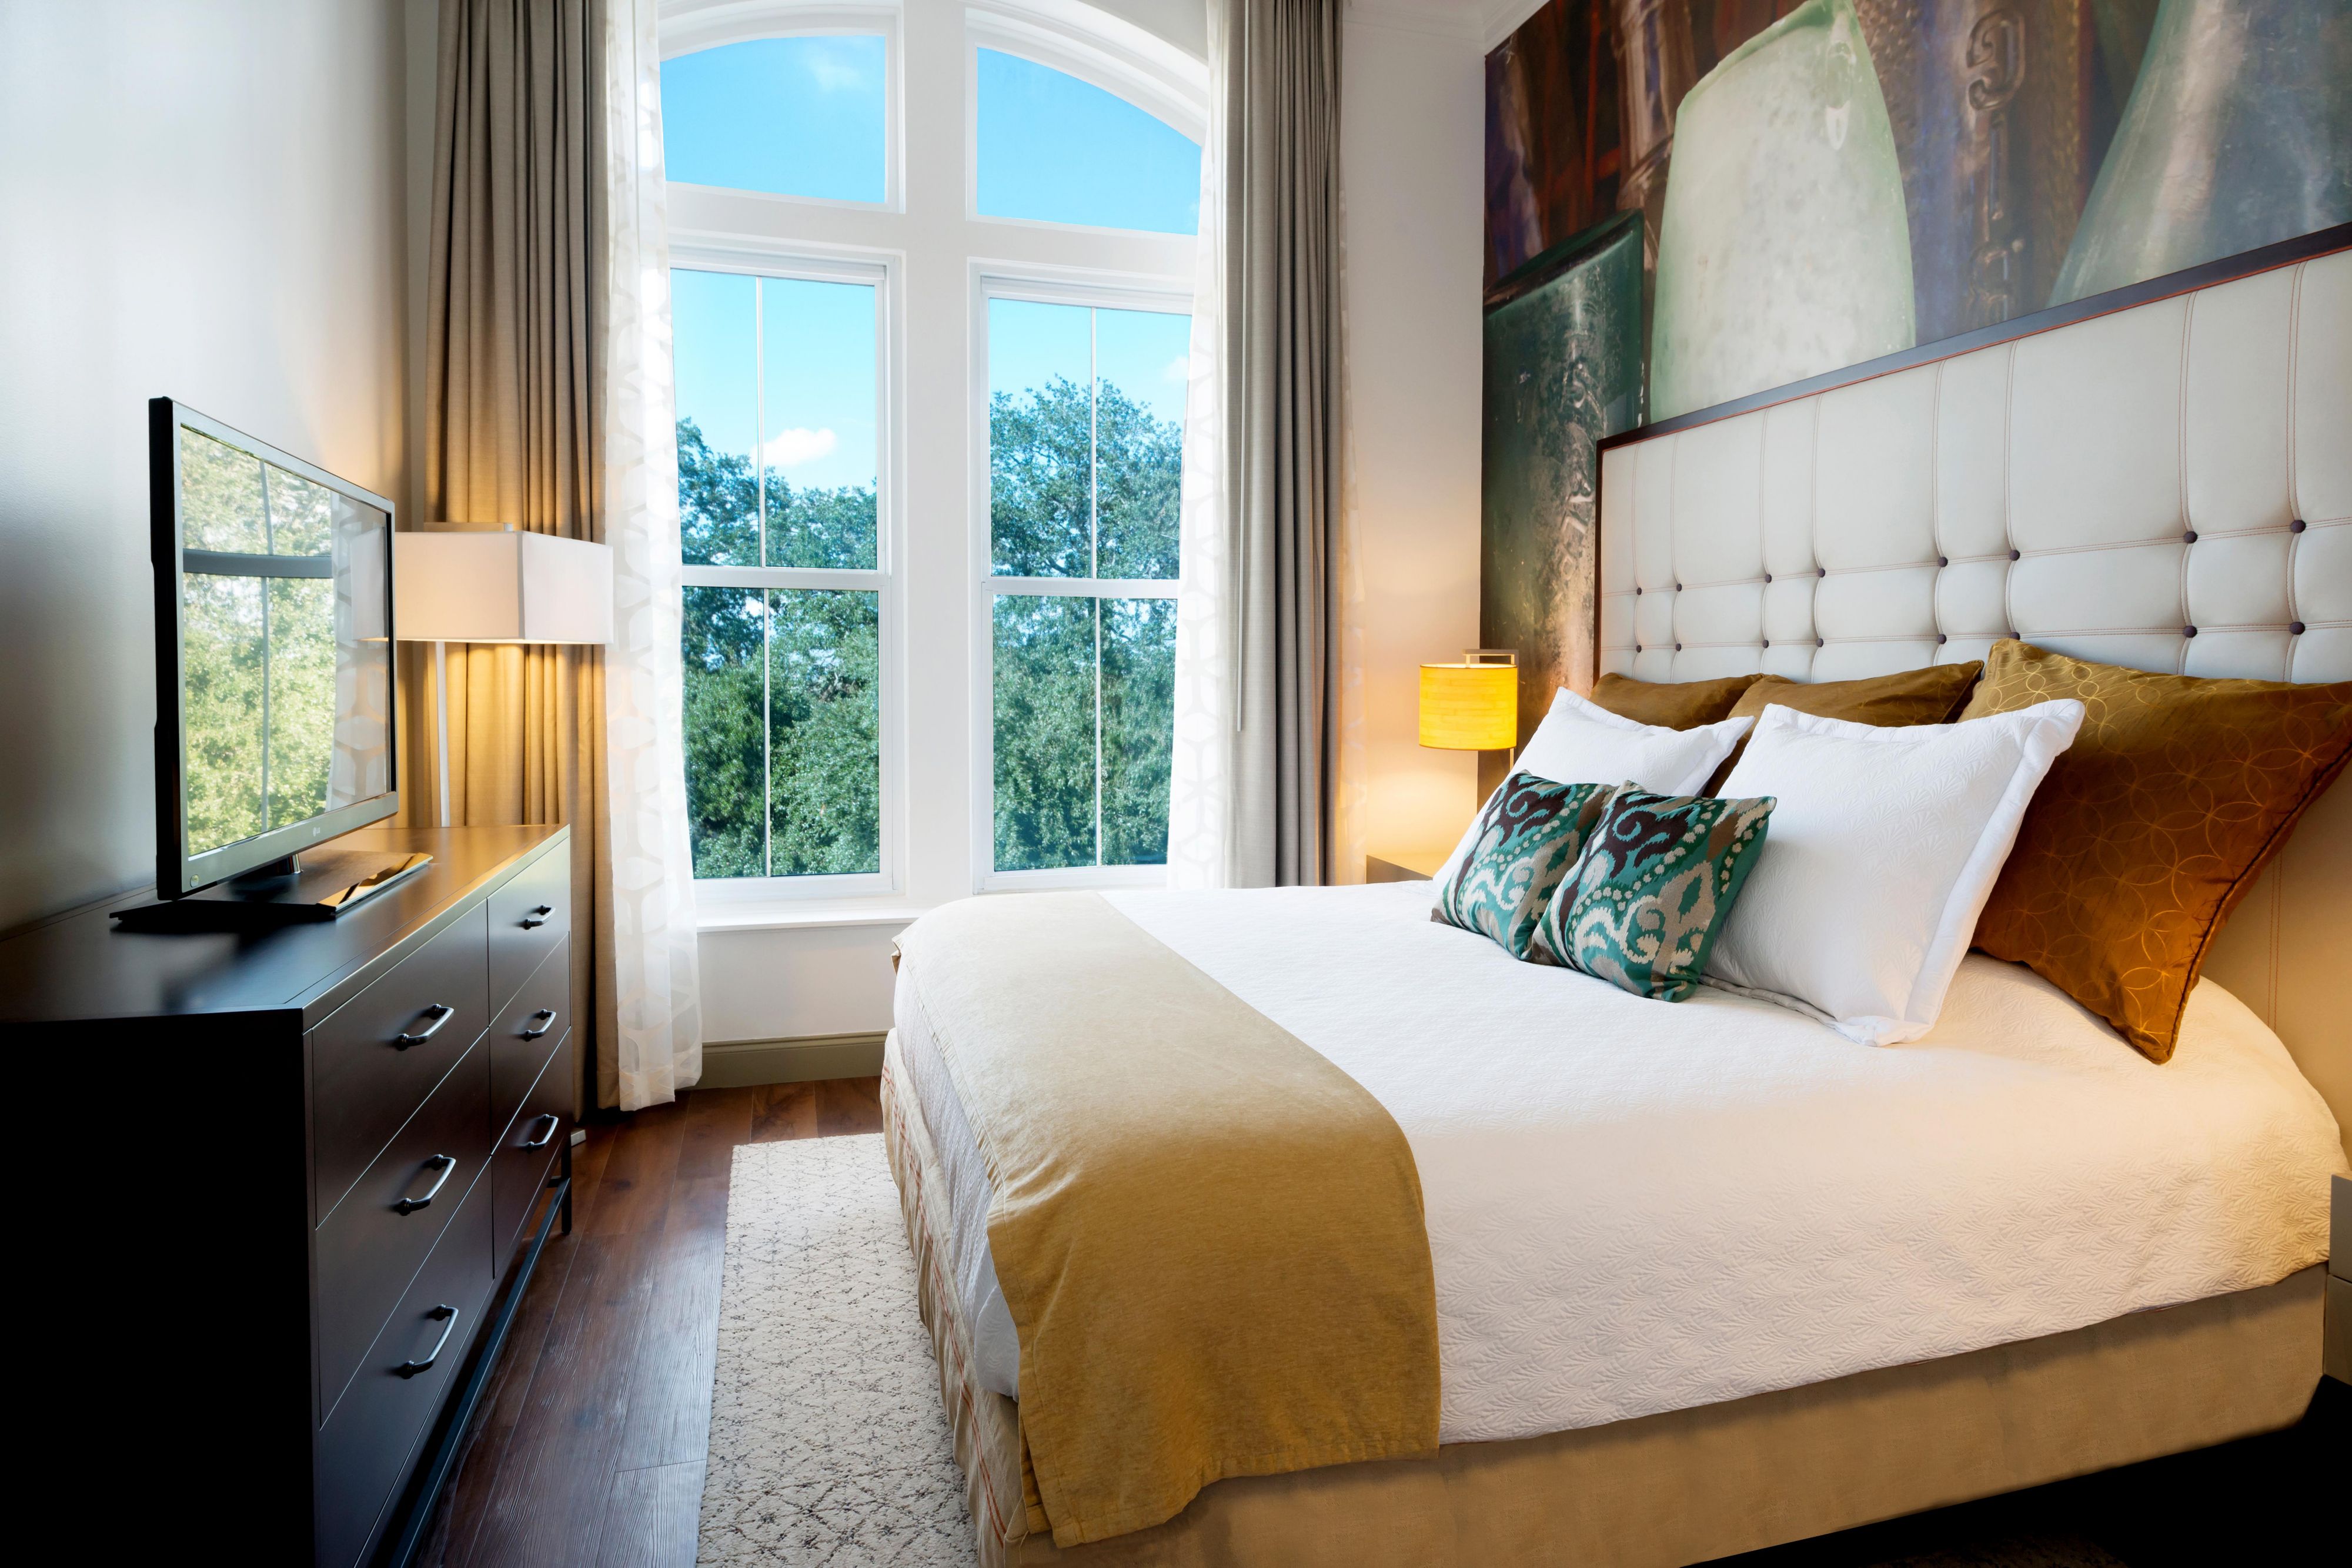 Experience our historic building during your trip to Savannah! Take the opportunity to upgrade to one of our suites and step back in time. All of our suites feature separate living areas for maximum relaxation, 10-foot tall windows overlooking the city, exposed brick walls and high ceilings. 